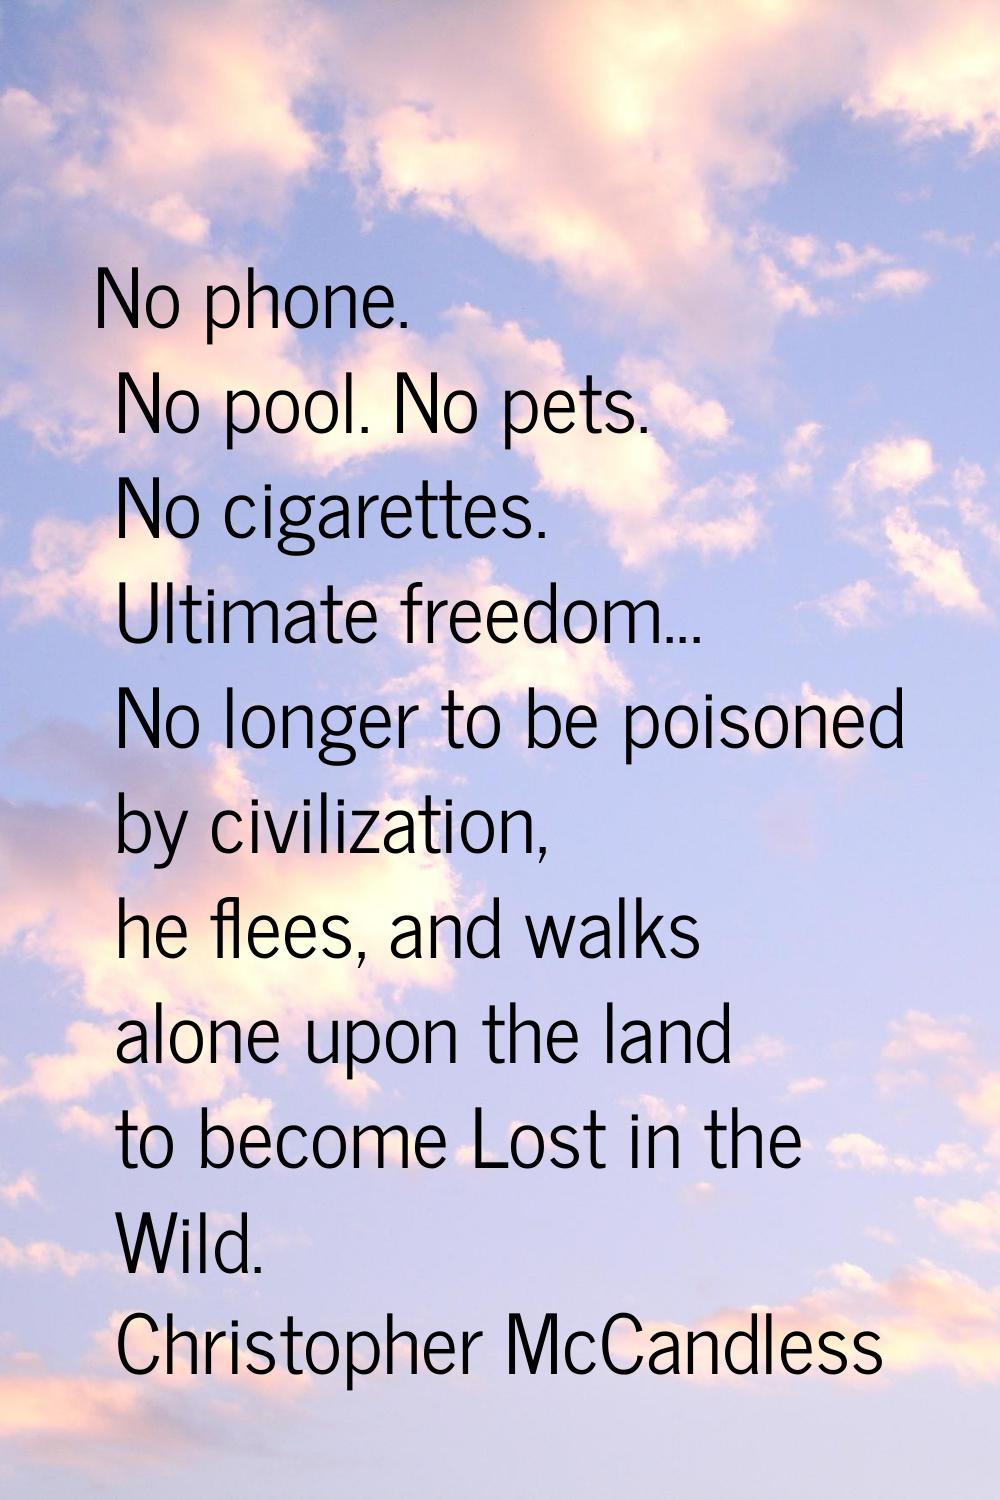 No phone. No pool. No pets. No cigarettes. Ultimate freedom... No longer to be poisoned by civiliza